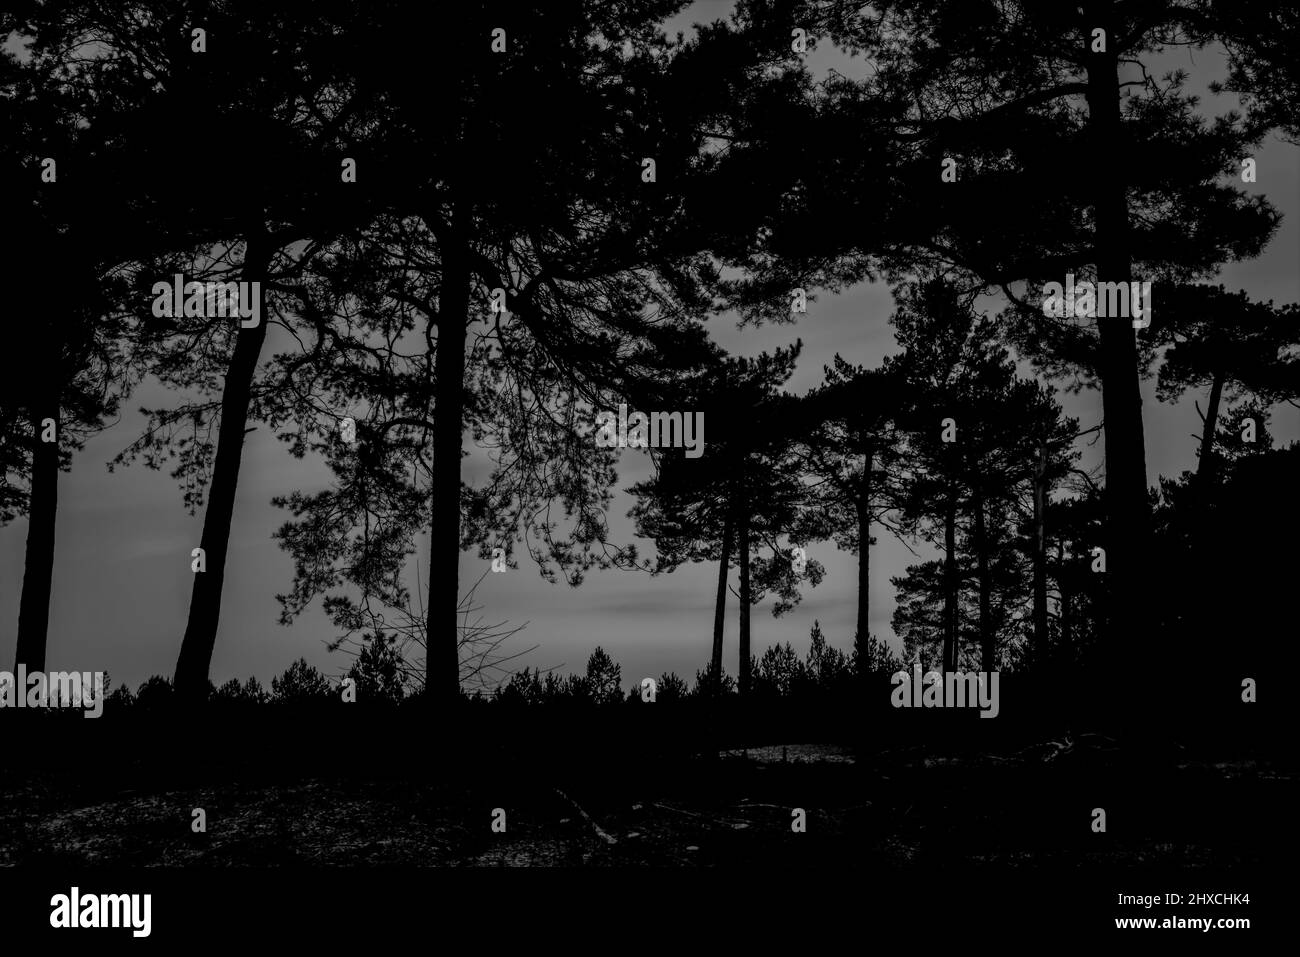 Silhouettes of pine trees in an almost harvested forest, black and white Stock Photo